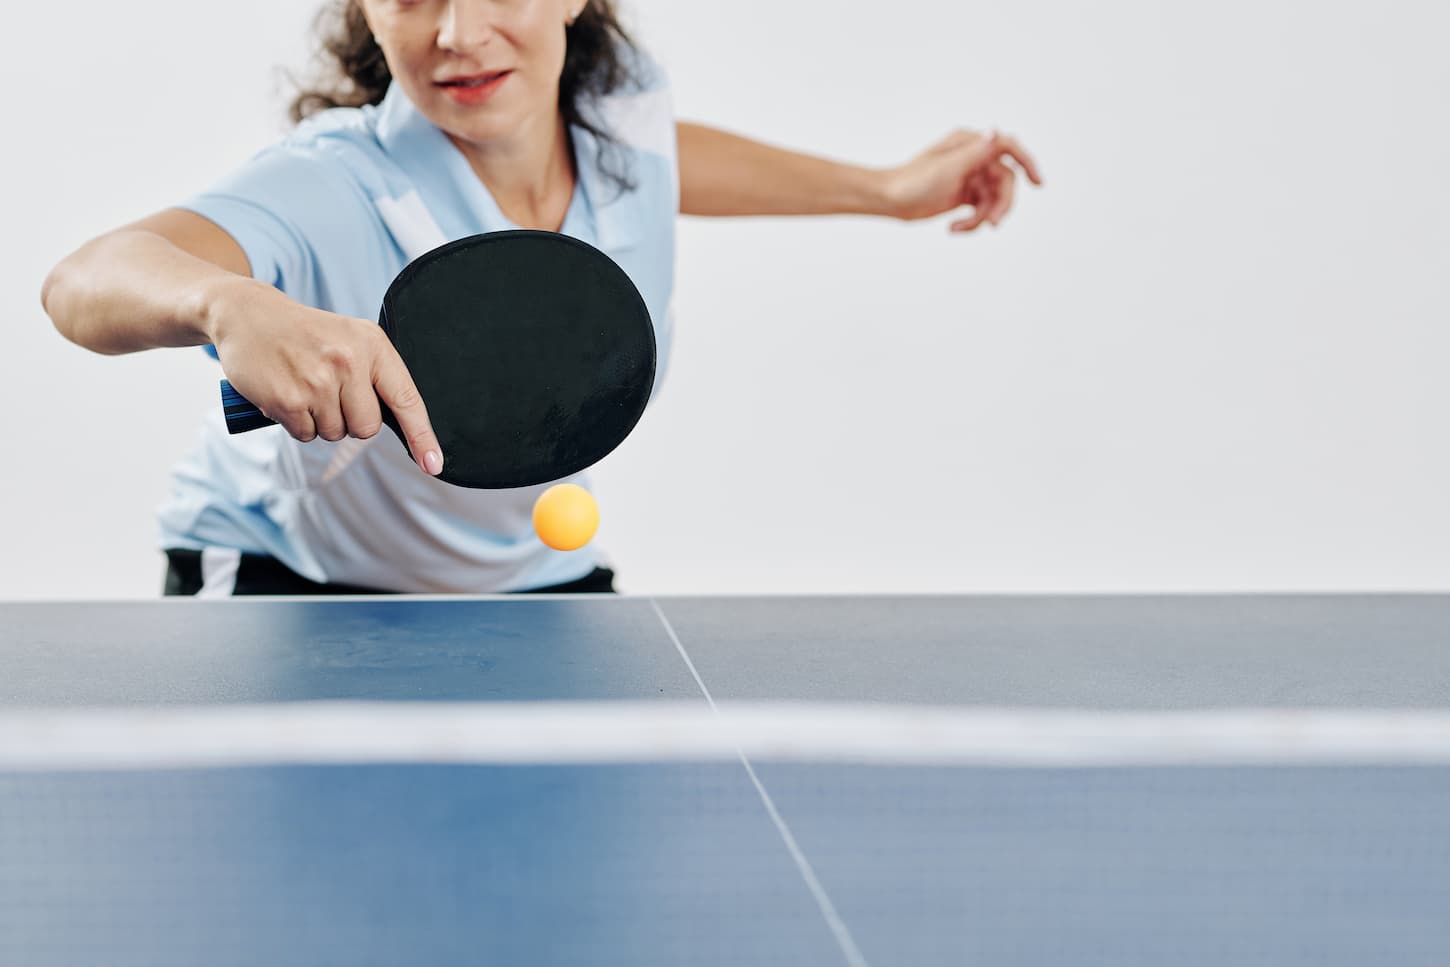 What Is the Size of a Table in Table Tennis?